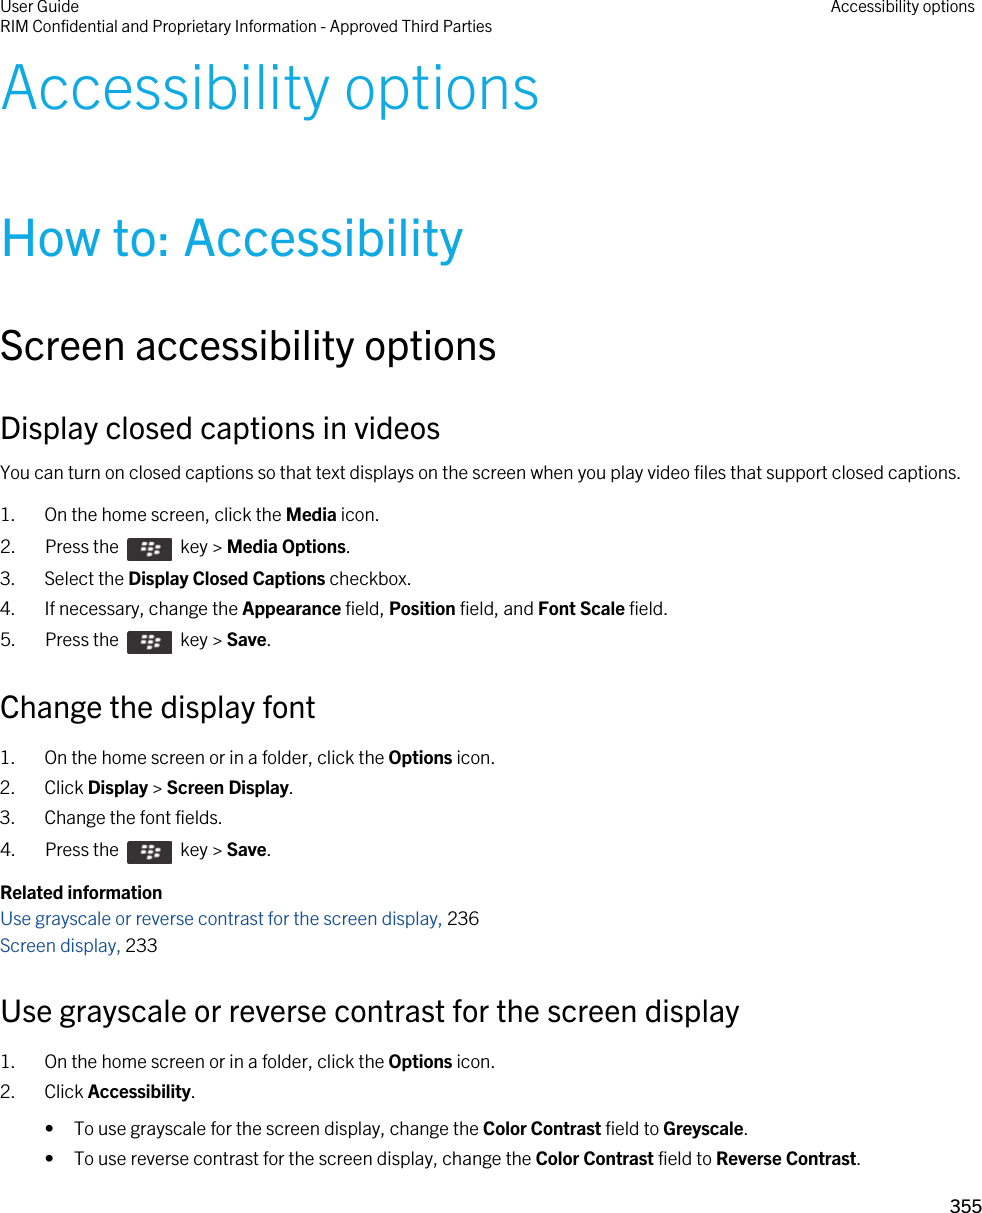 Accessibility optionsHow to: AccessibilityScreen accessibility optionsDisplay closed captions in videosYou can turn on closed captions so that text displays on the screen when you play video files that support closed captions.1. On the home screen, click the Media icon.2.  Press the    key &gt; Media Options. 3. Select the Display Closed Captions checkbox.4. If necessary, change the Appearance field, Position field, and Font Scale field.5.  Press the    key &gt; Save. Change the display font1. On the home screen or in a folder, click the Options icon.2. Click Display &gt; Screen Display.3. Change the font fields.4.  Press the    key &gt; Save. Related informationUse grayscale or reverse contrast for the screen display, 236 Screen display, 233 Use grayscale or reverse contrast for the screen display1. On the home screen or in a folder, click the Options icon.2. Click Accessibility.• To use grayscale for the screen display, change the Color Contrast field to Greyscale.• To use reverse contrast for the screen display, change the Color Contrast field to Reverse Contrast.User GuideRIM Confidential and Proprietary Information - Approved Third Parties Accessibility options355 